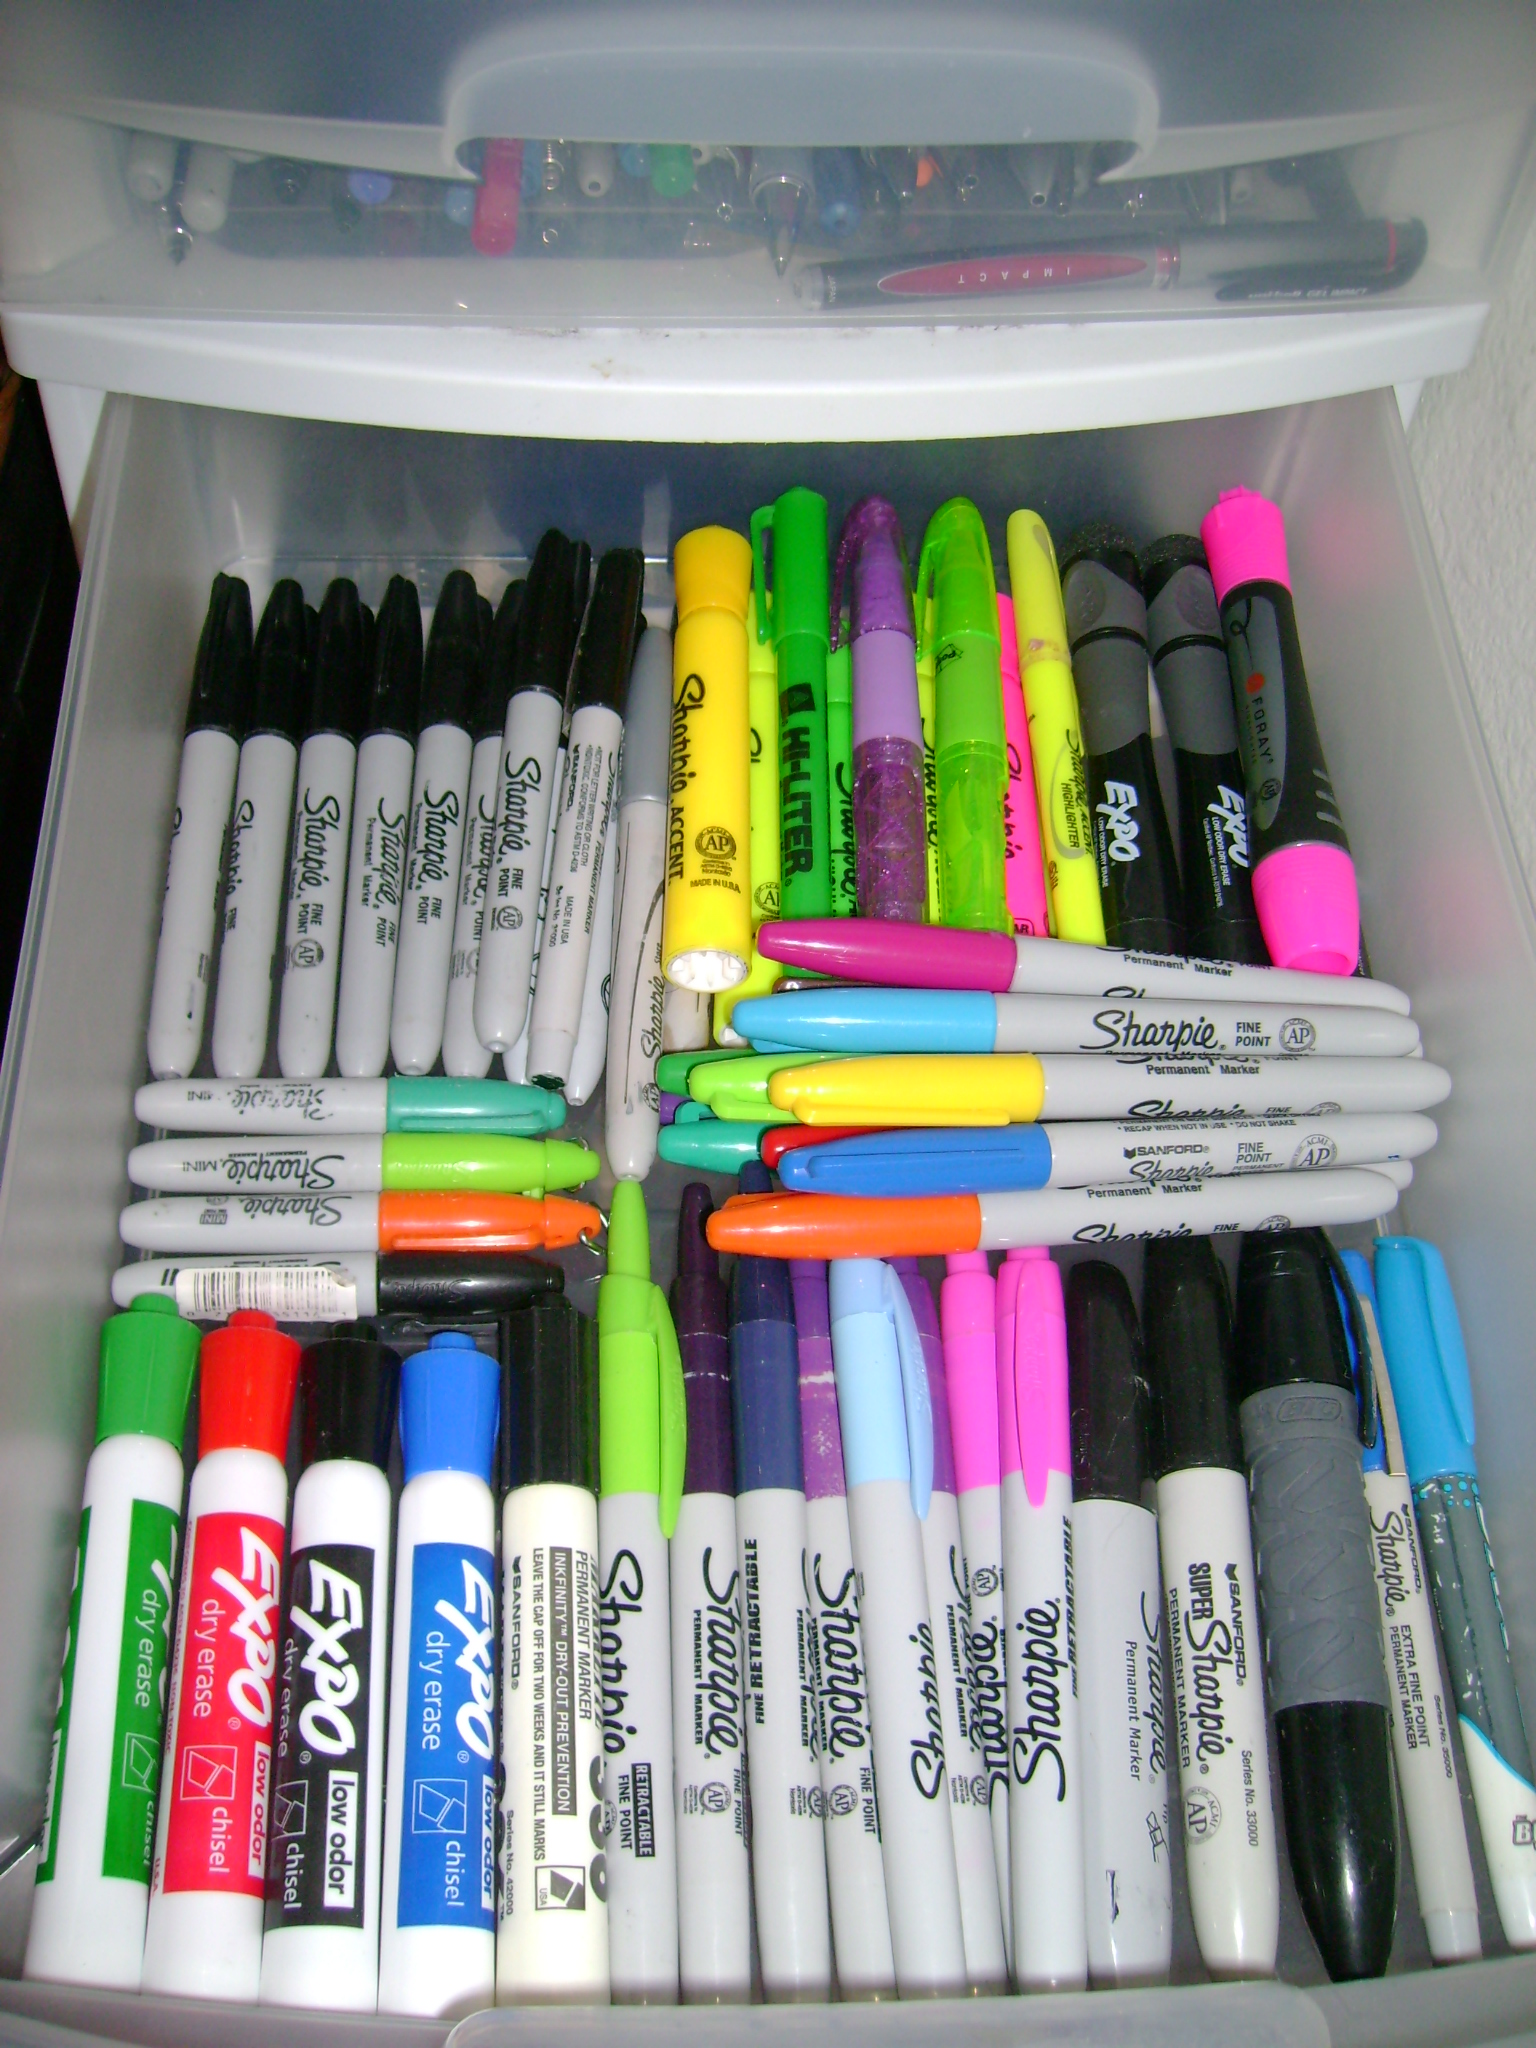 some of my favorite office supplies: sharpie permanent markers :)